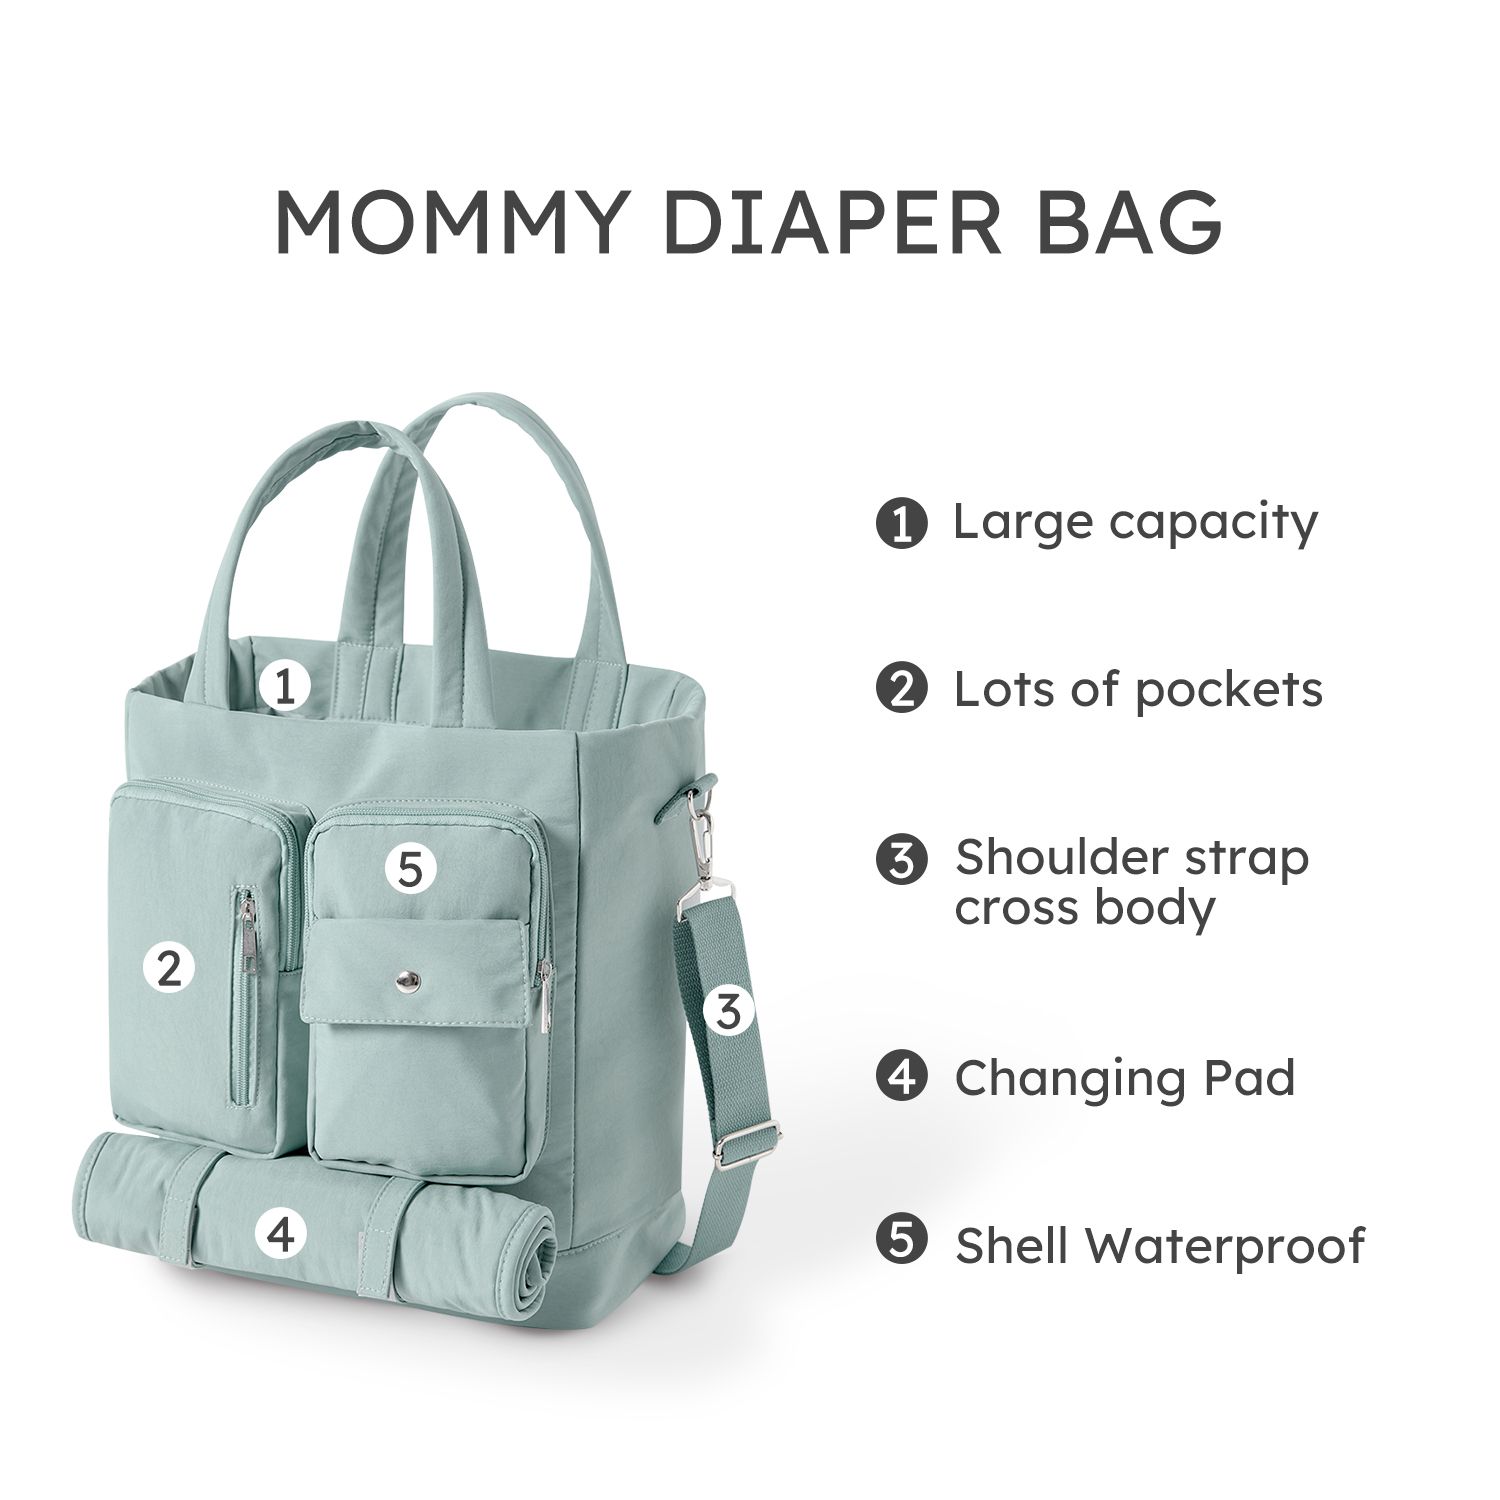 Baby Bag Tote Multifunction Large Capacity Baby Bag With Waterproof Changing Pad And Adjustable Shoulder Strap